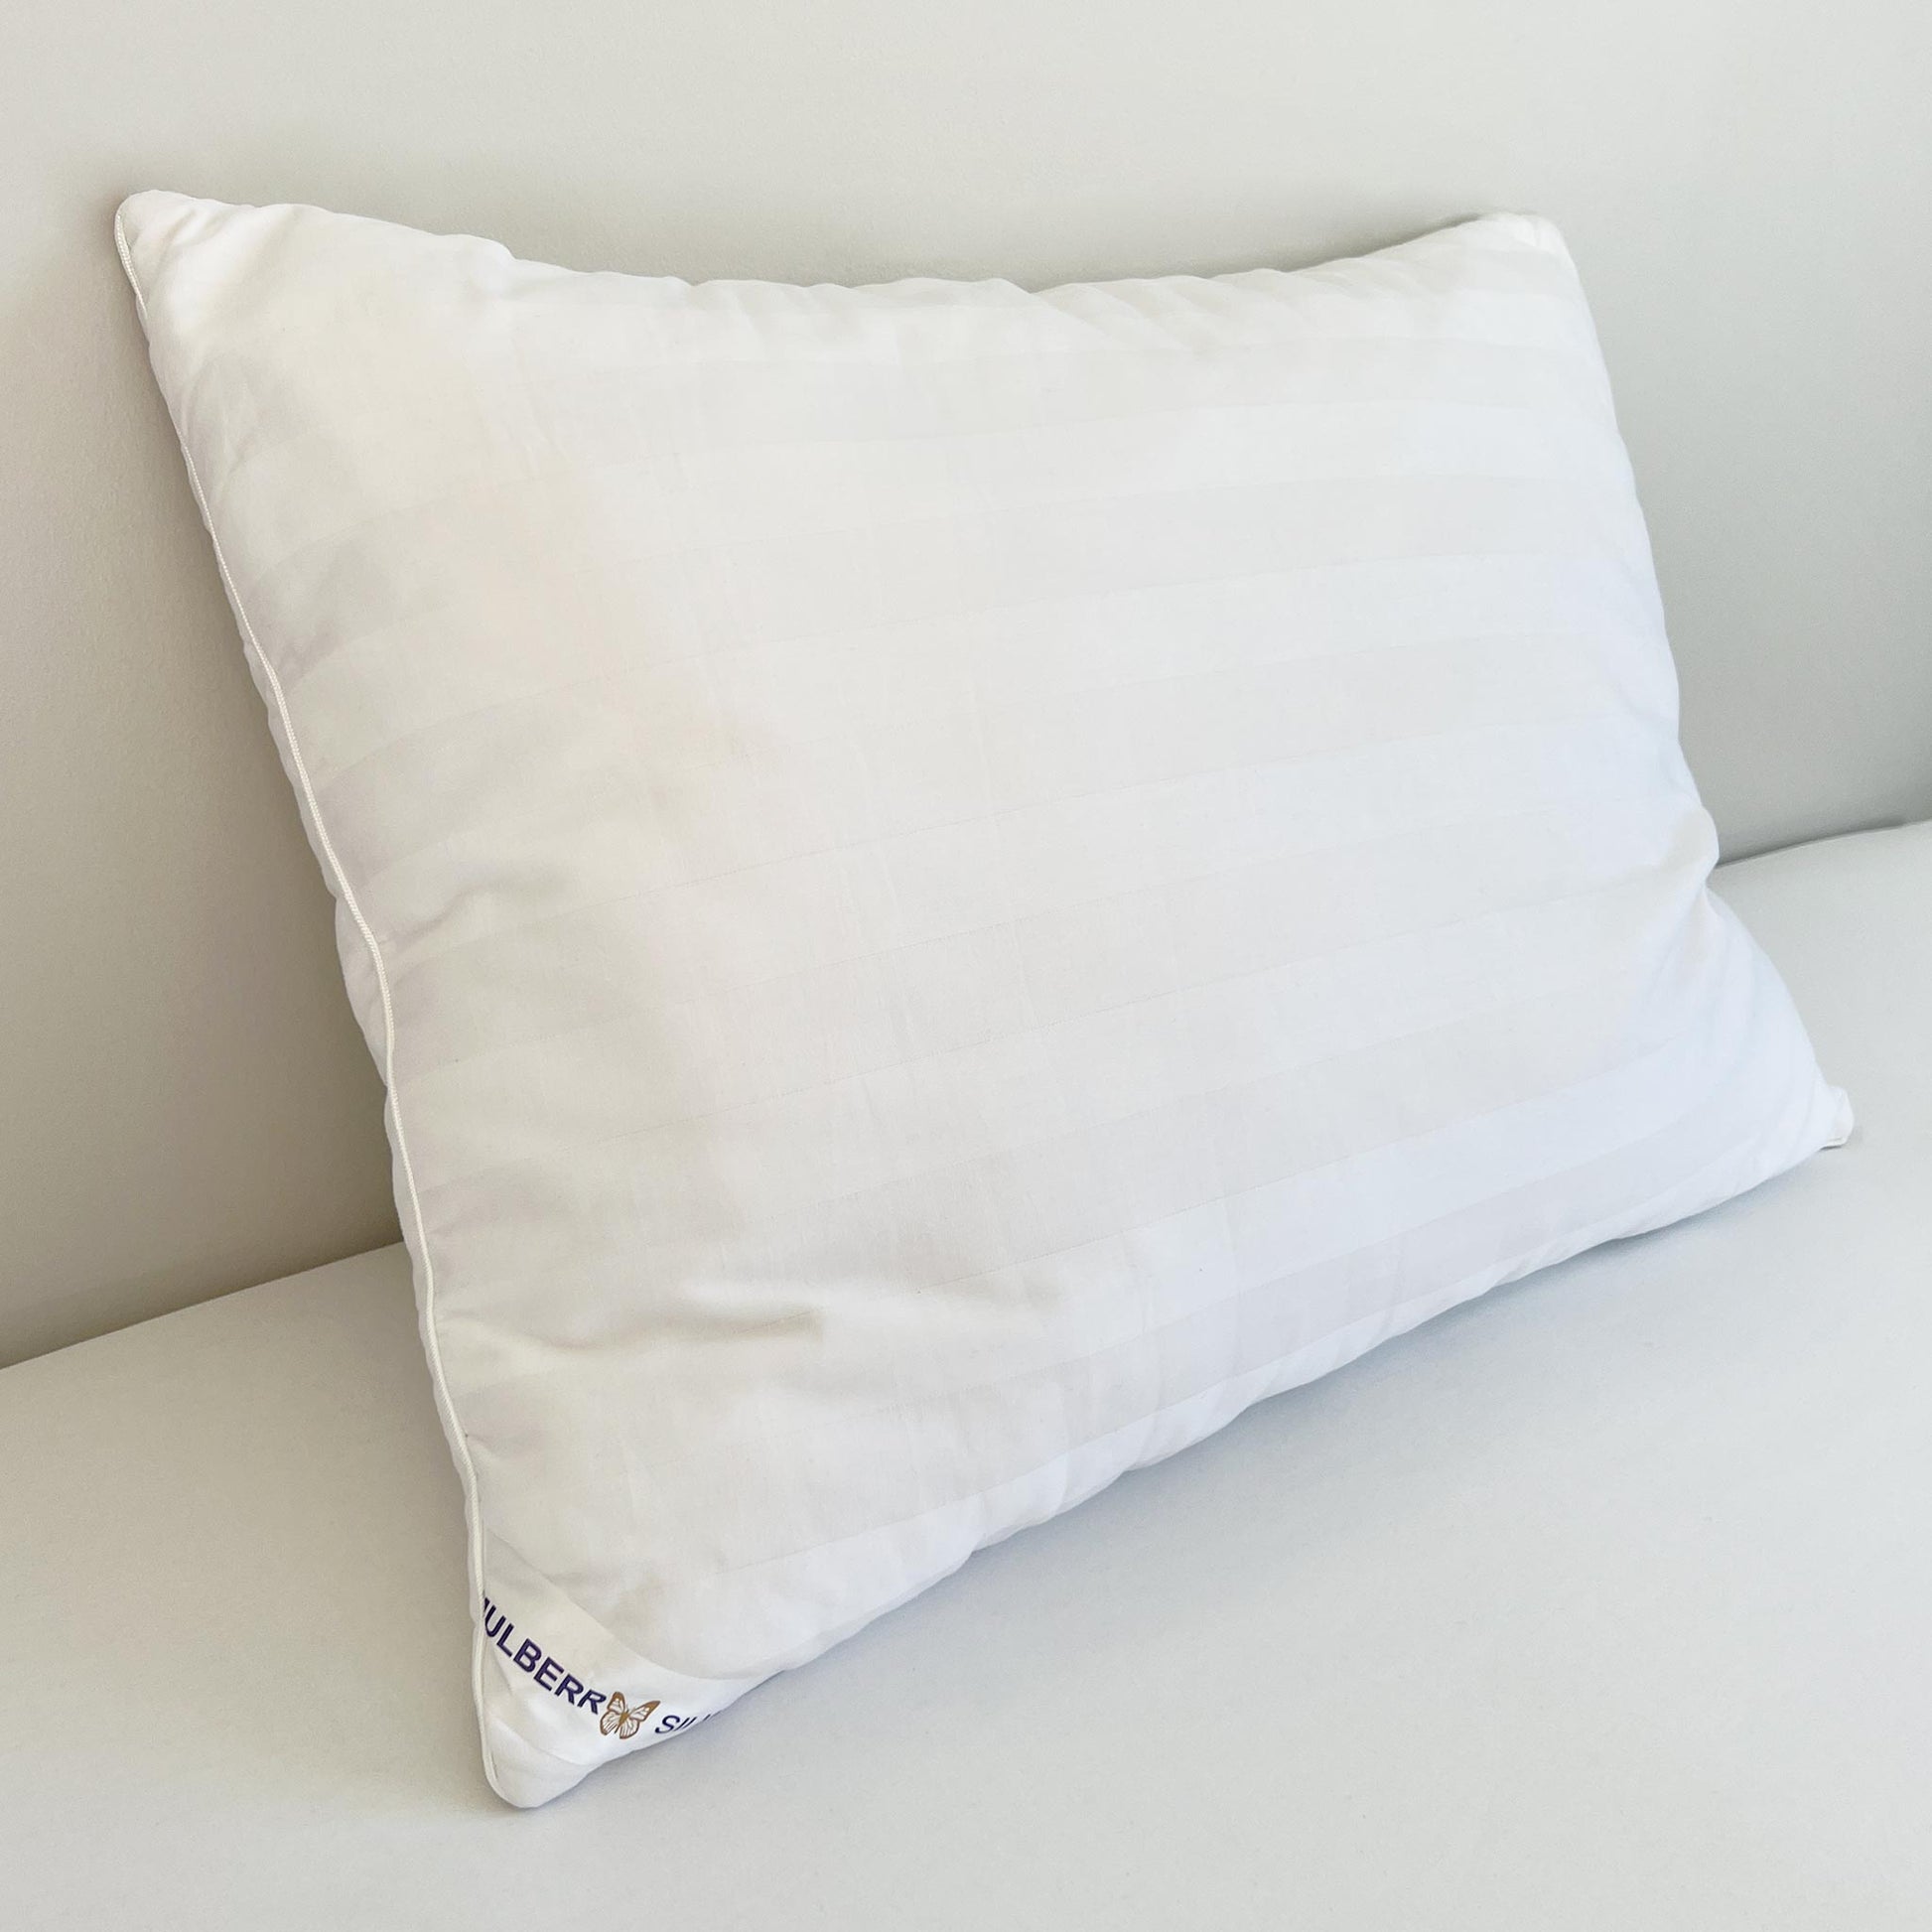 Mulberry Silk Perfect Pillow - Buy One Get One Free – ShowTV New Zealand